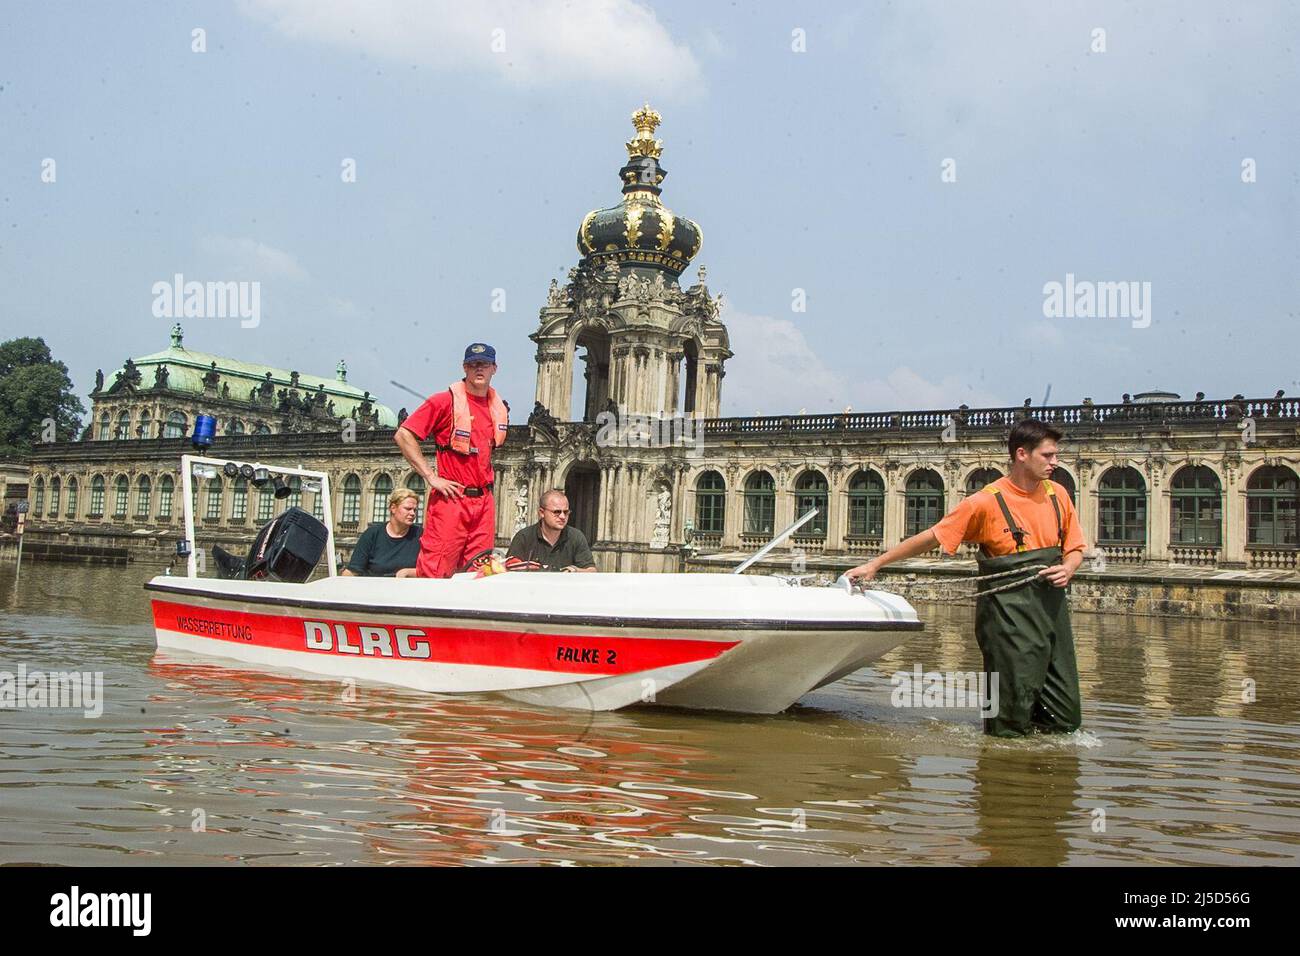 Dresden, 17.08.2002 - DLRG boat in the flooded Dresden city center, at the Zwinger. On August 12, 2002, at about 6:00 p.m., a disaster alarm was sounded for Dresden. In the city center the main station, the Semperoper, the Zwinger and the state parliament were flooded. [automated translation] Stock Photo